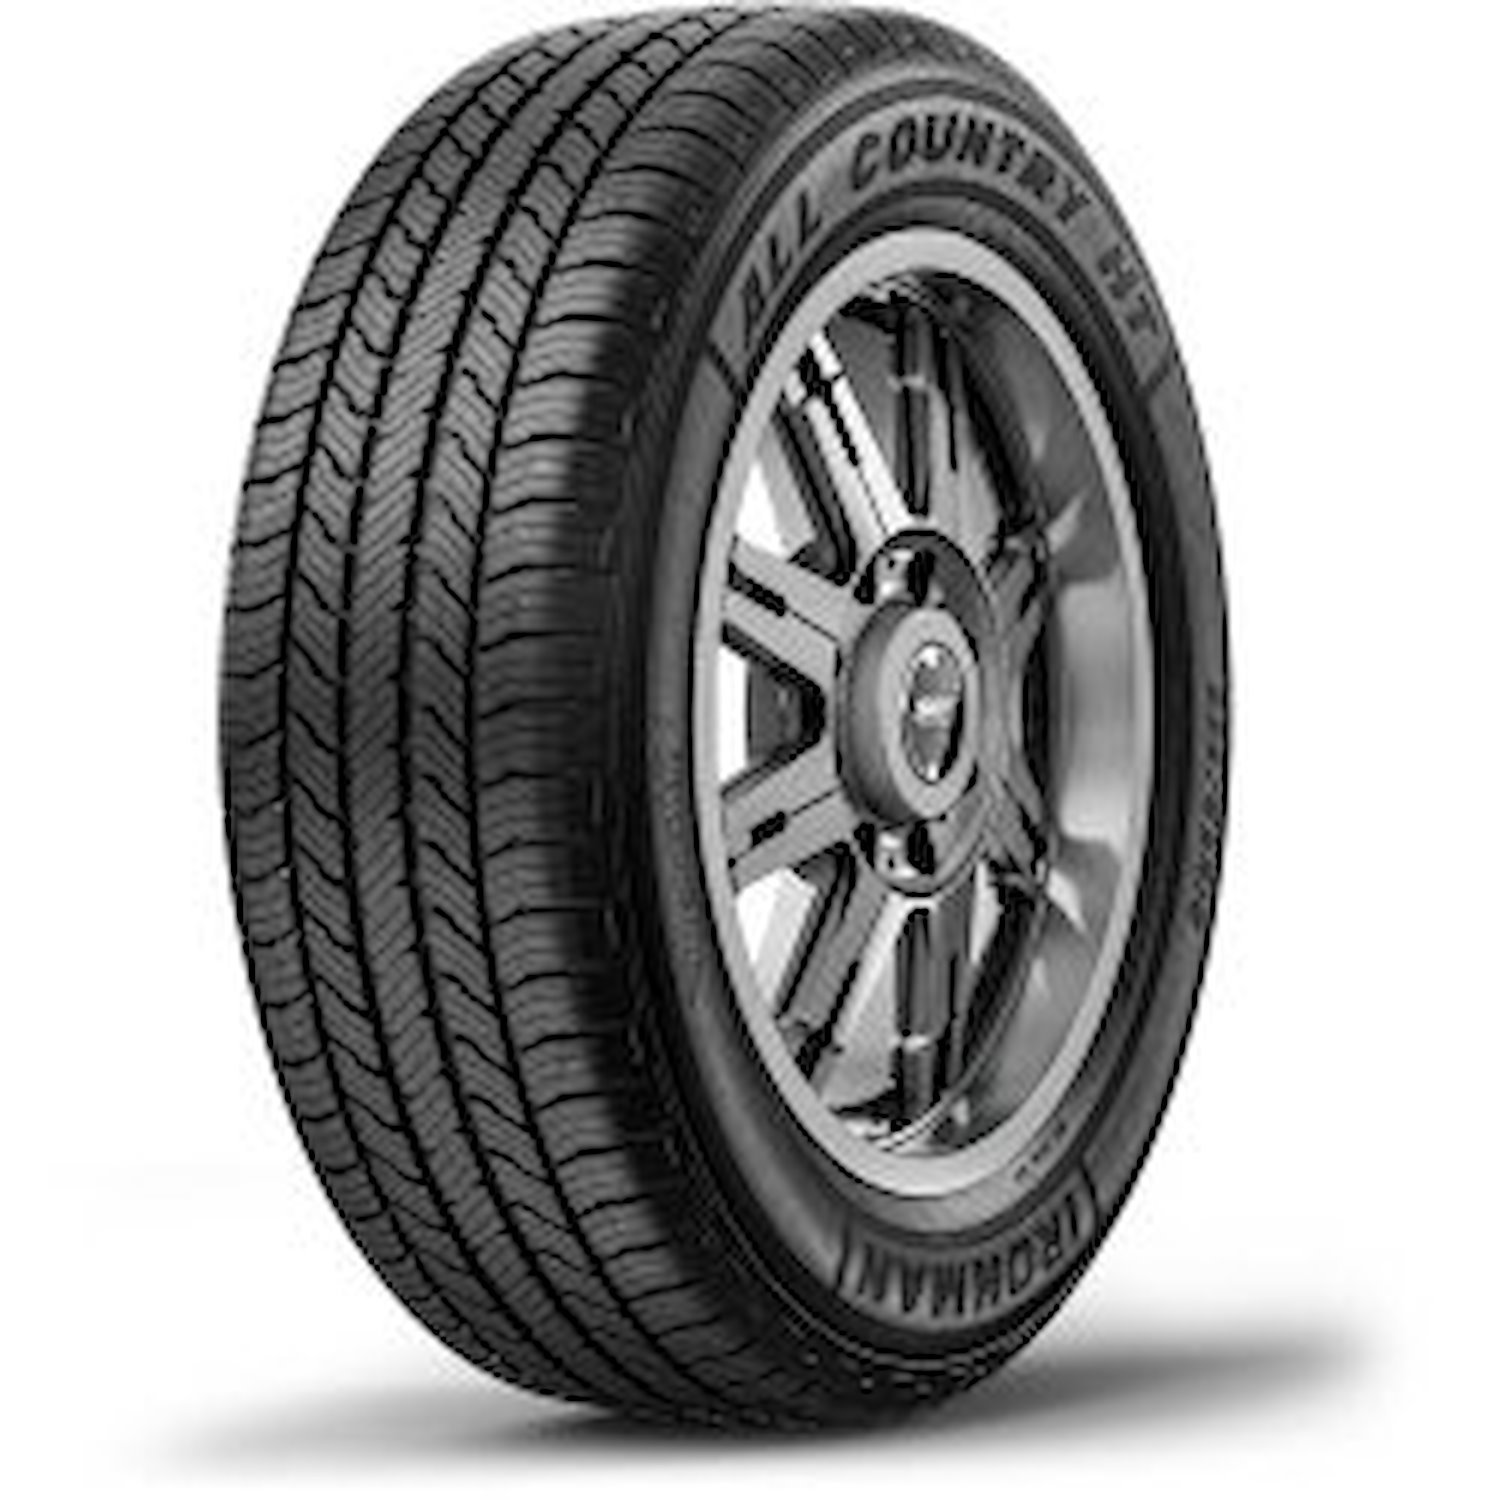 03092 All Country HT Tire, 235/70R15, 103T